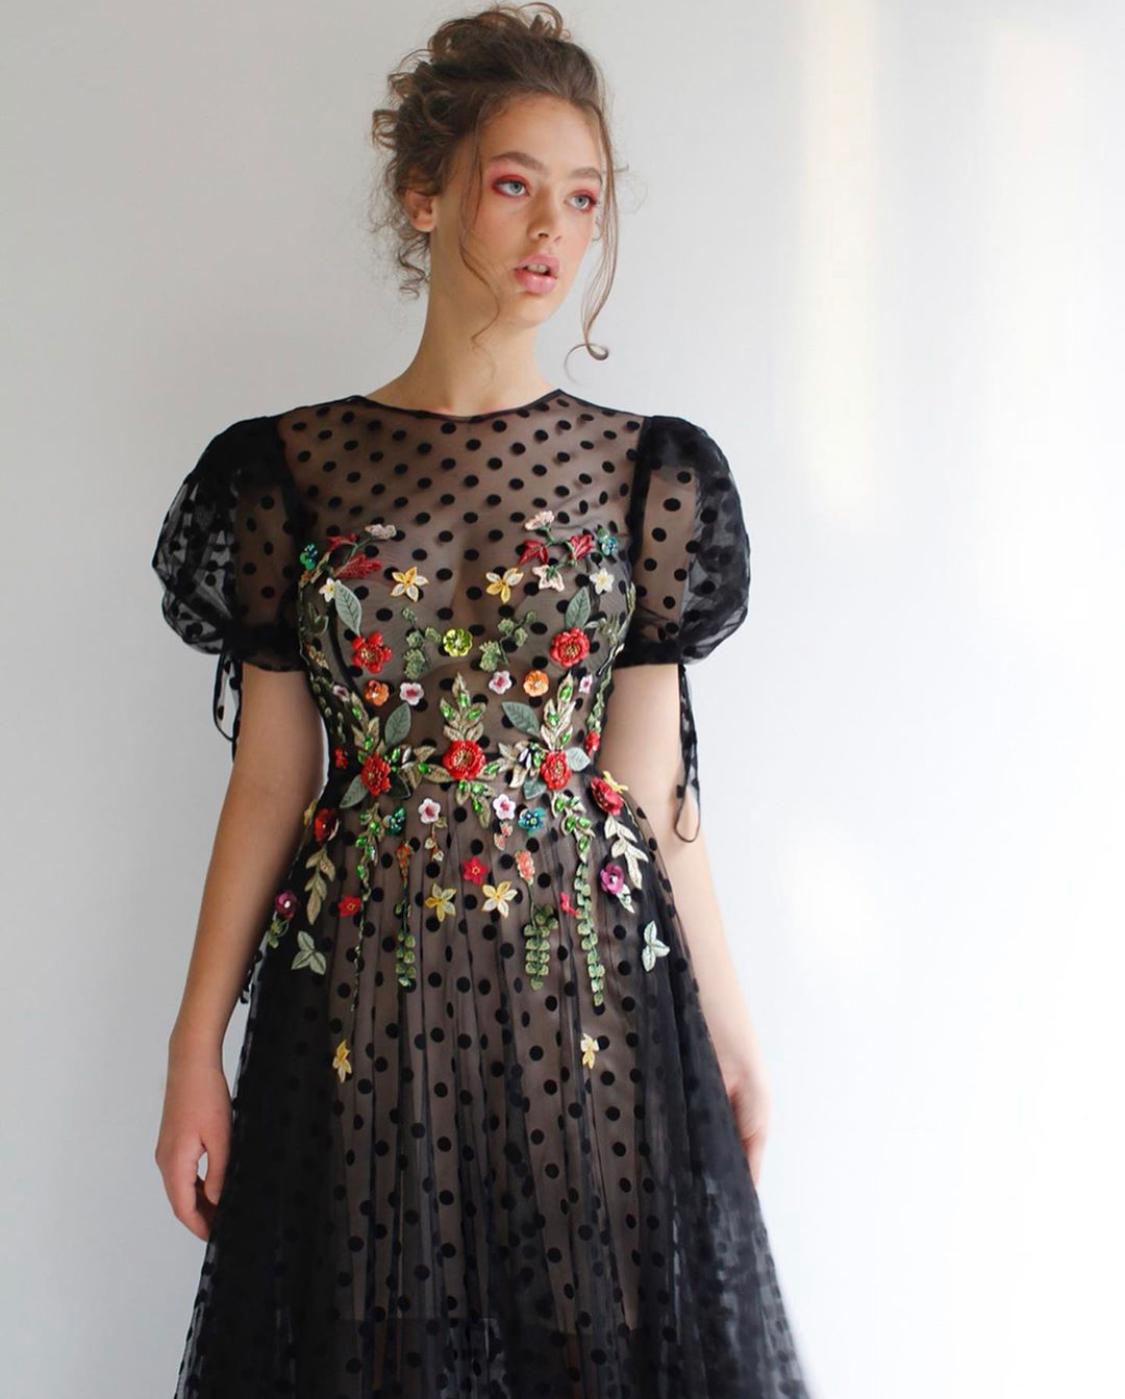 Black A-Line dress with dotted fabric, short sleeves and embroidery